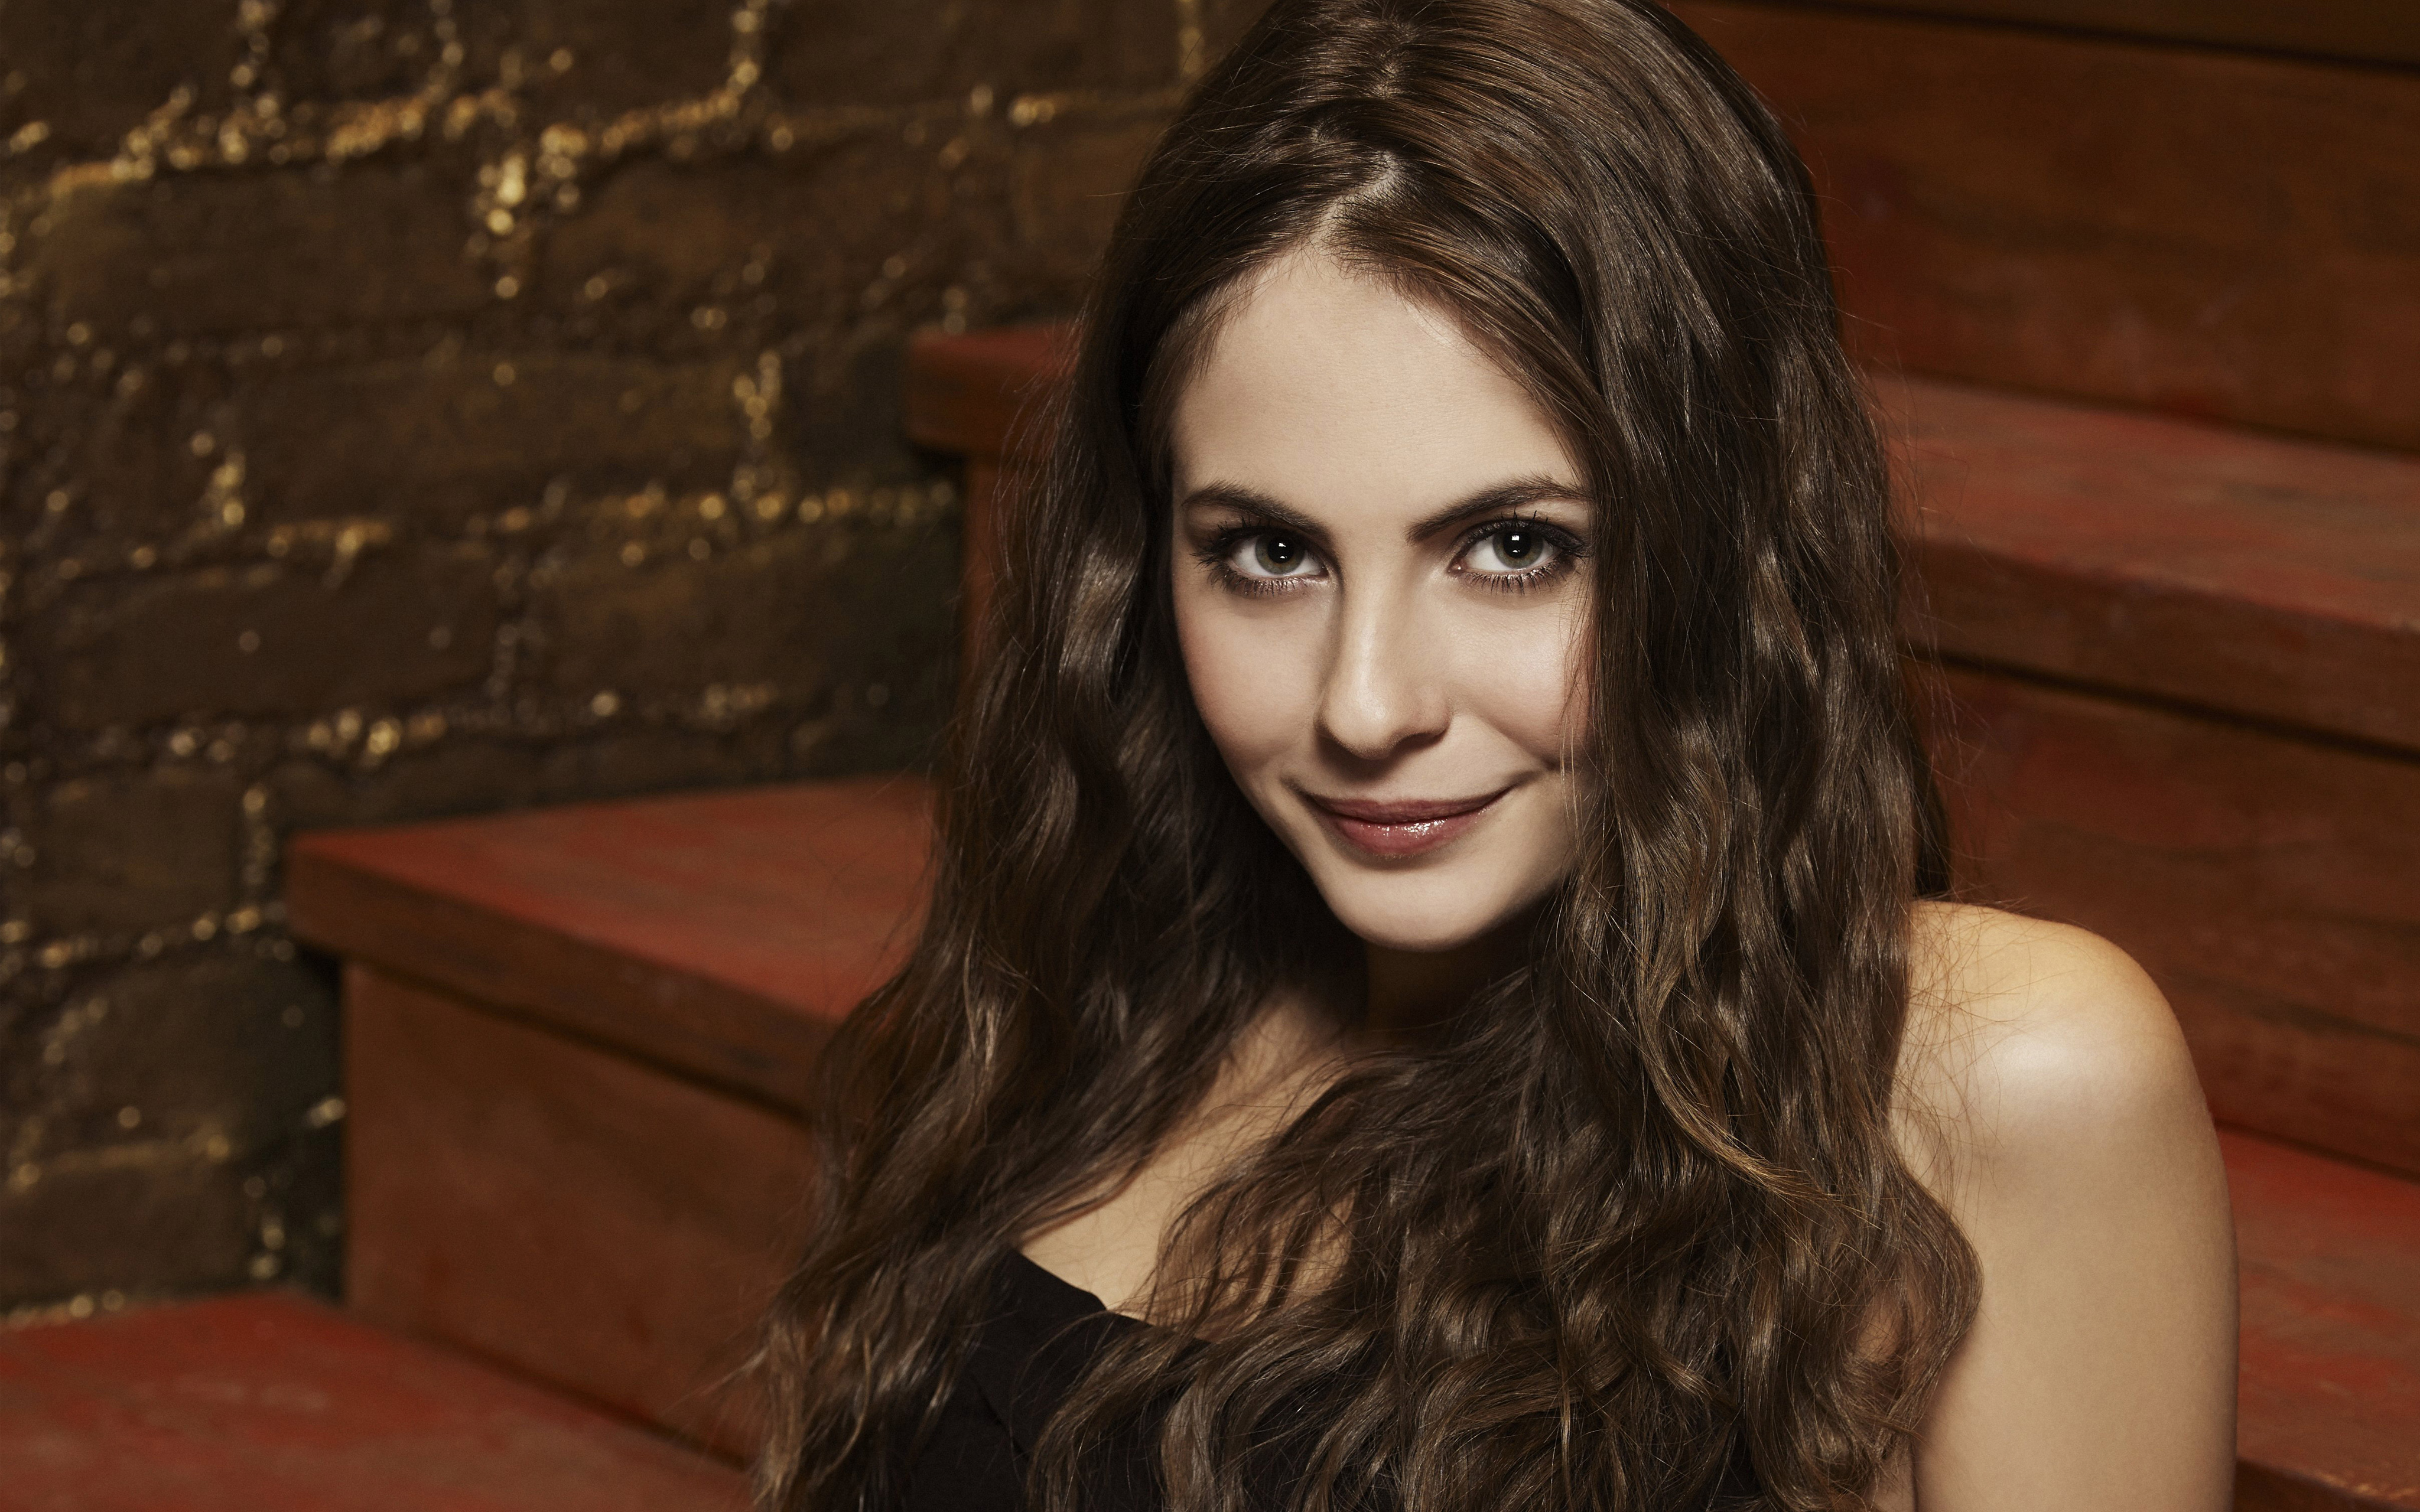 celebrity, willa holland, actress, american, brunette, face, green eyes, smile